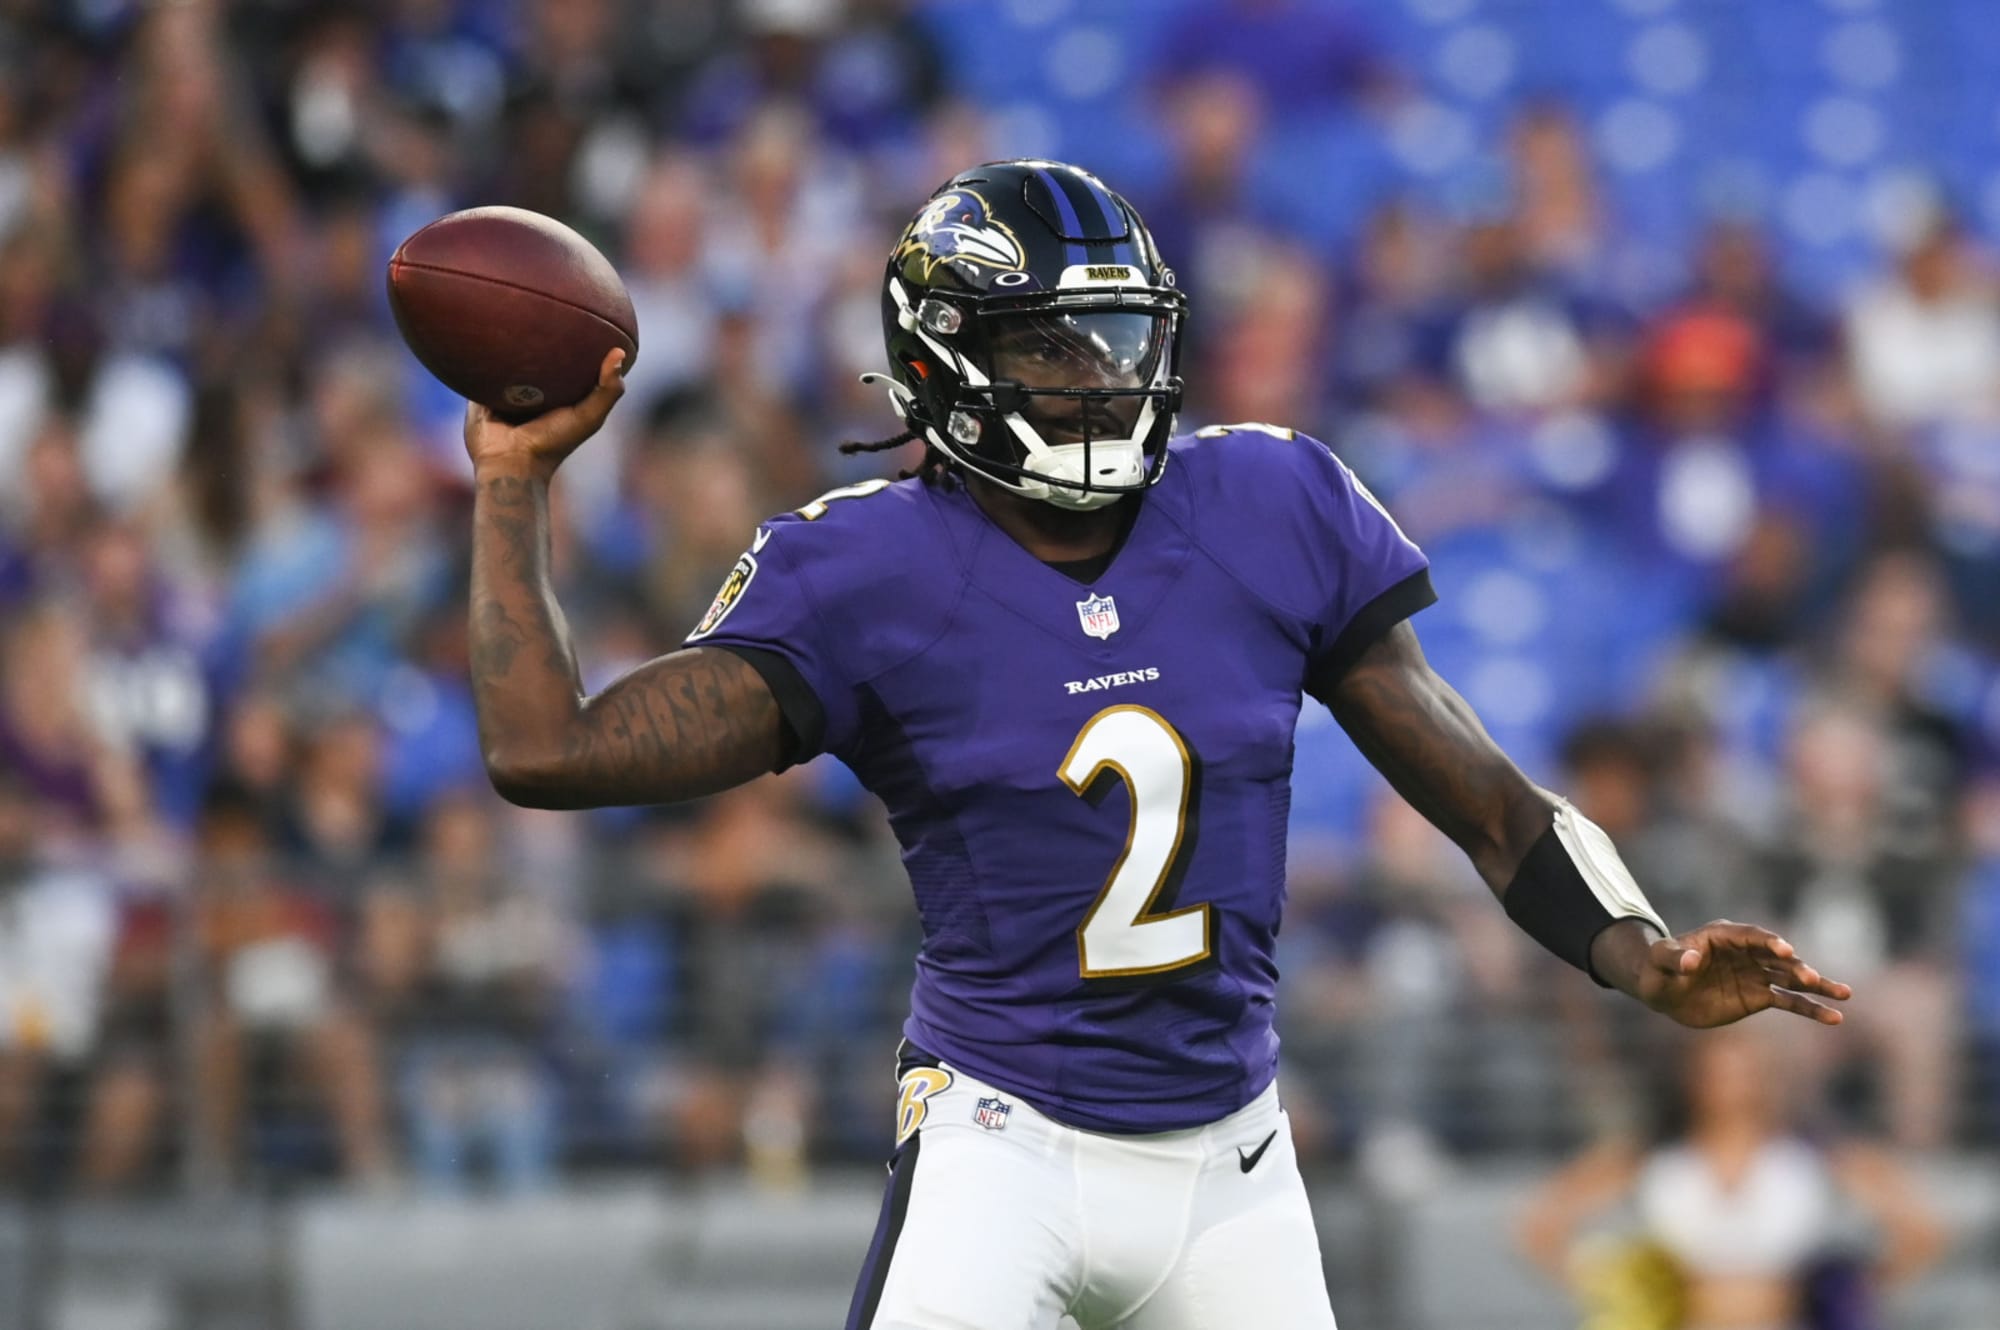 Chuck Clark of the Ravens reportedly requested a trade after the NFL Draft